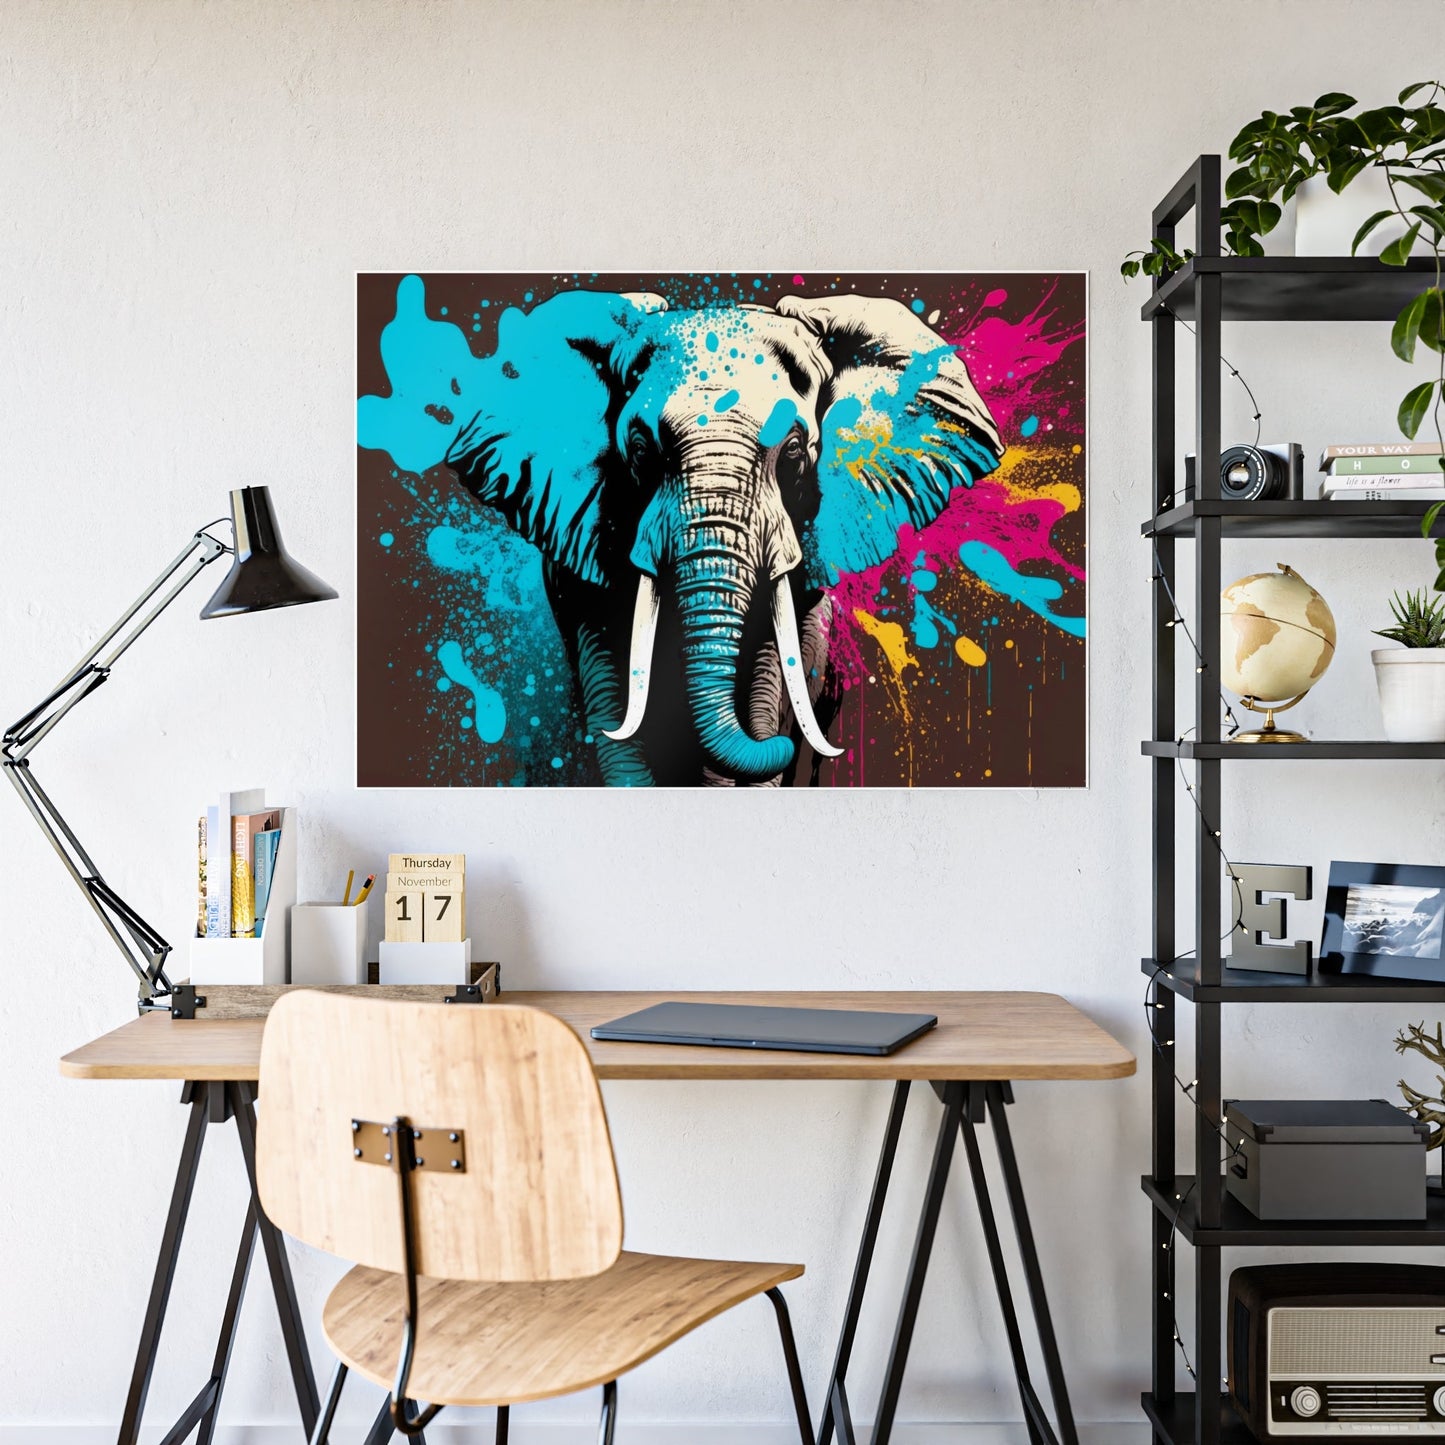 Gentle Giant: Natural Canvas Wall Art of Elephant